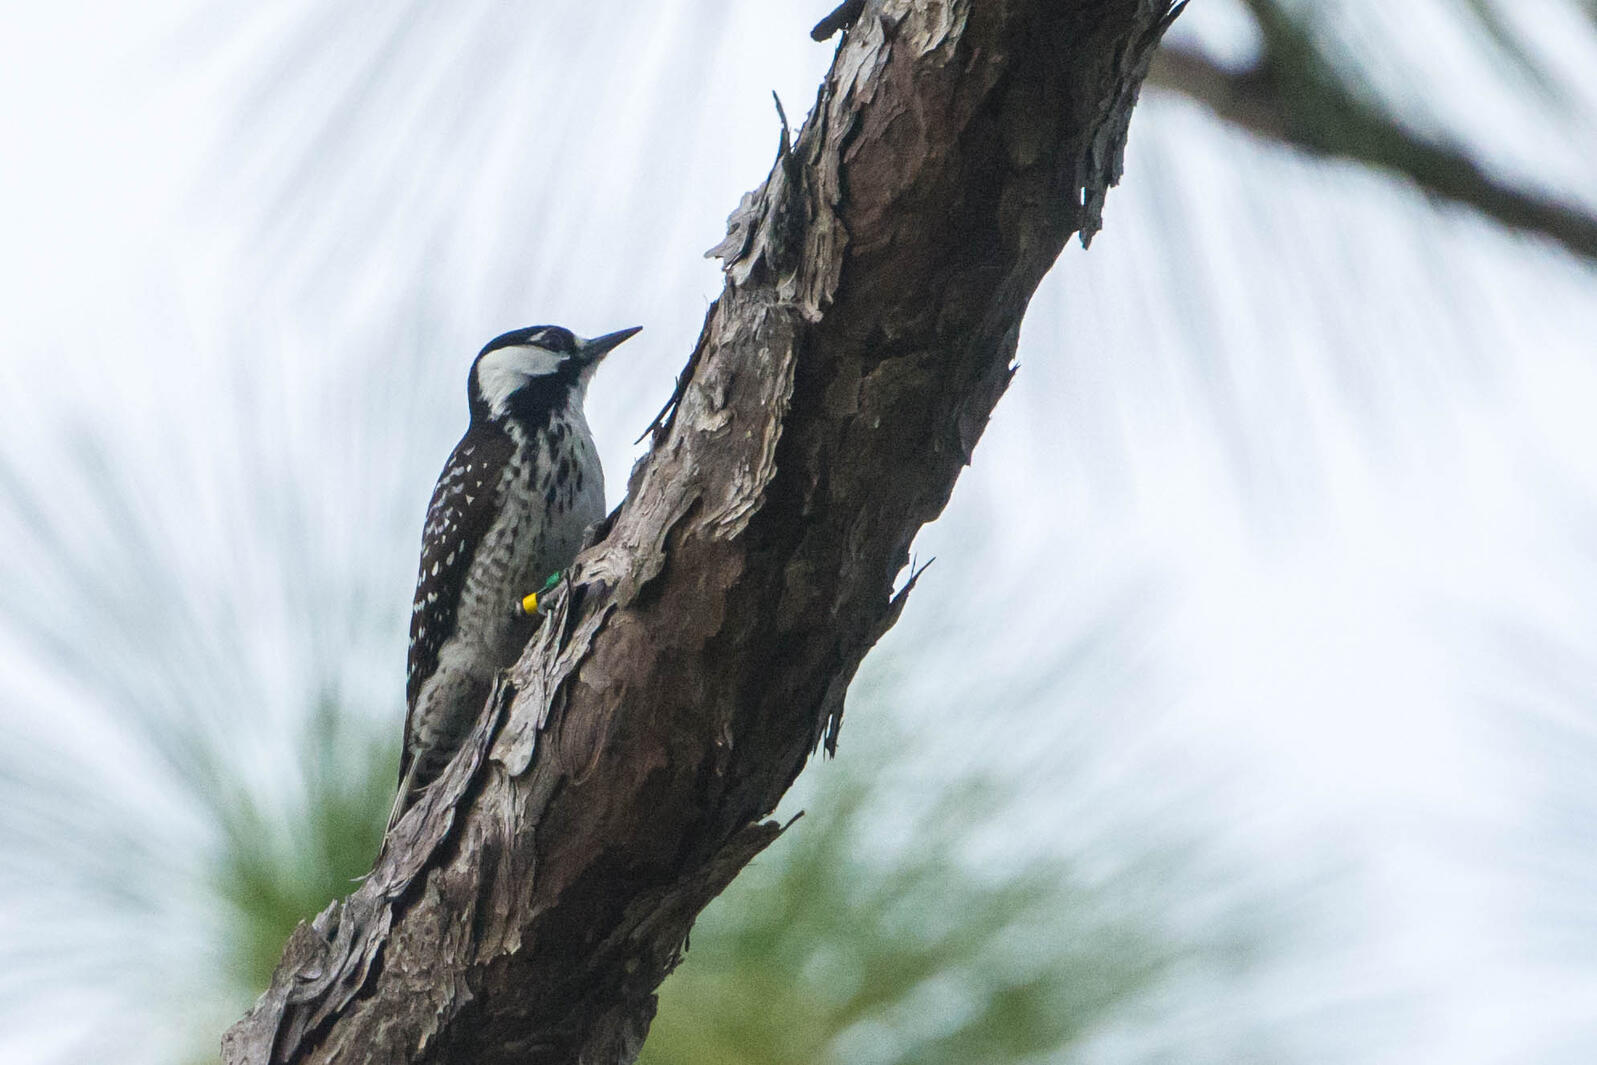 White and black woodpecker on the limb of a pine tree.